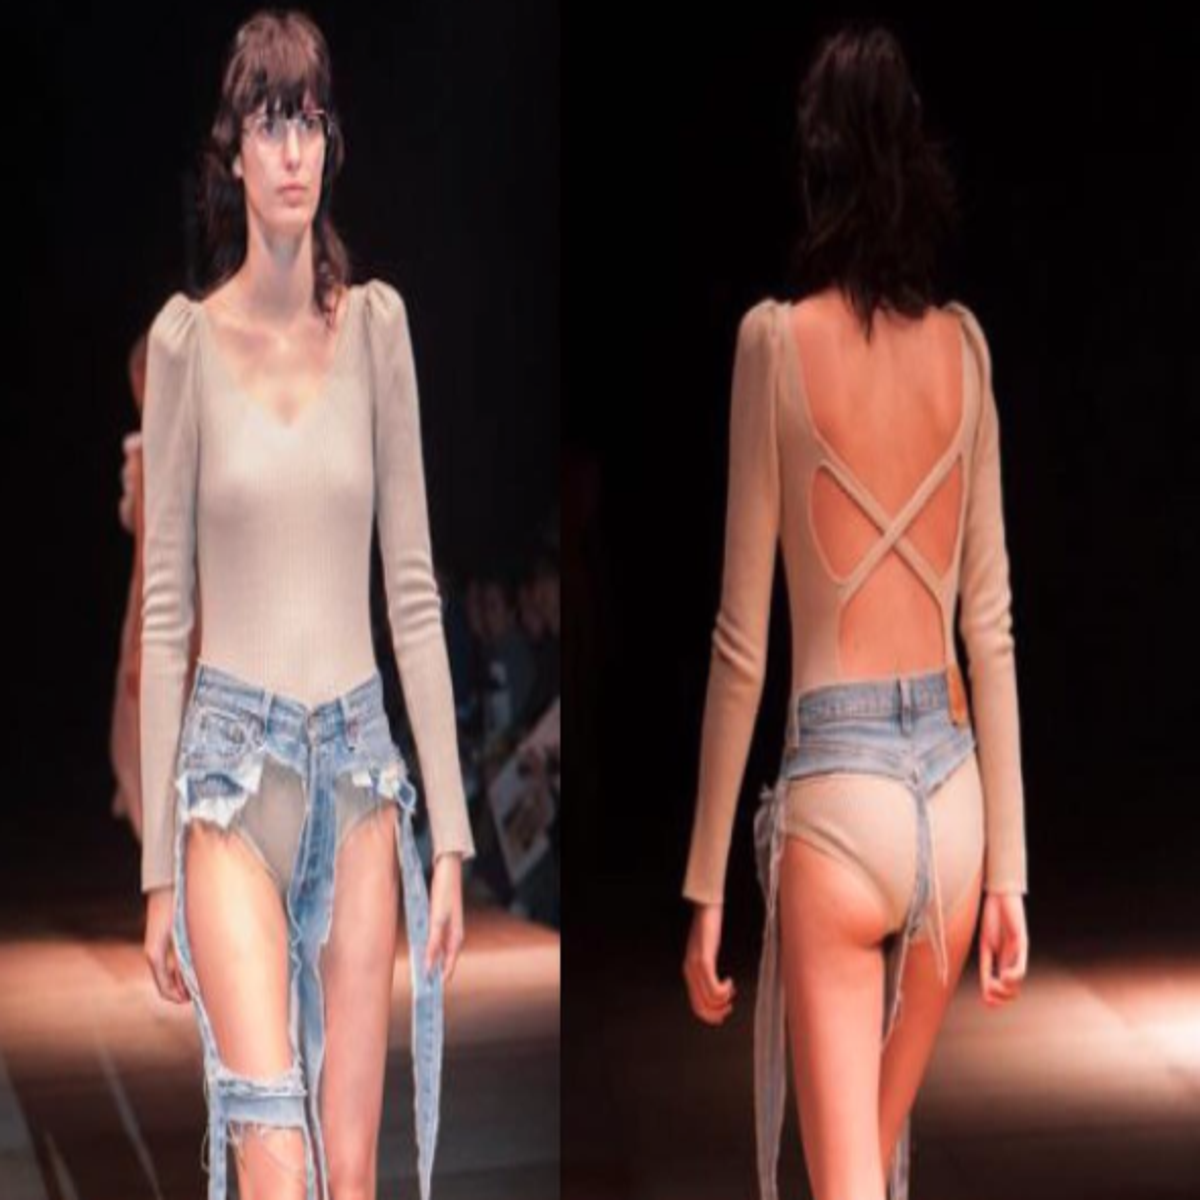 Thong jeans: A designer just debuted denim that exposes your